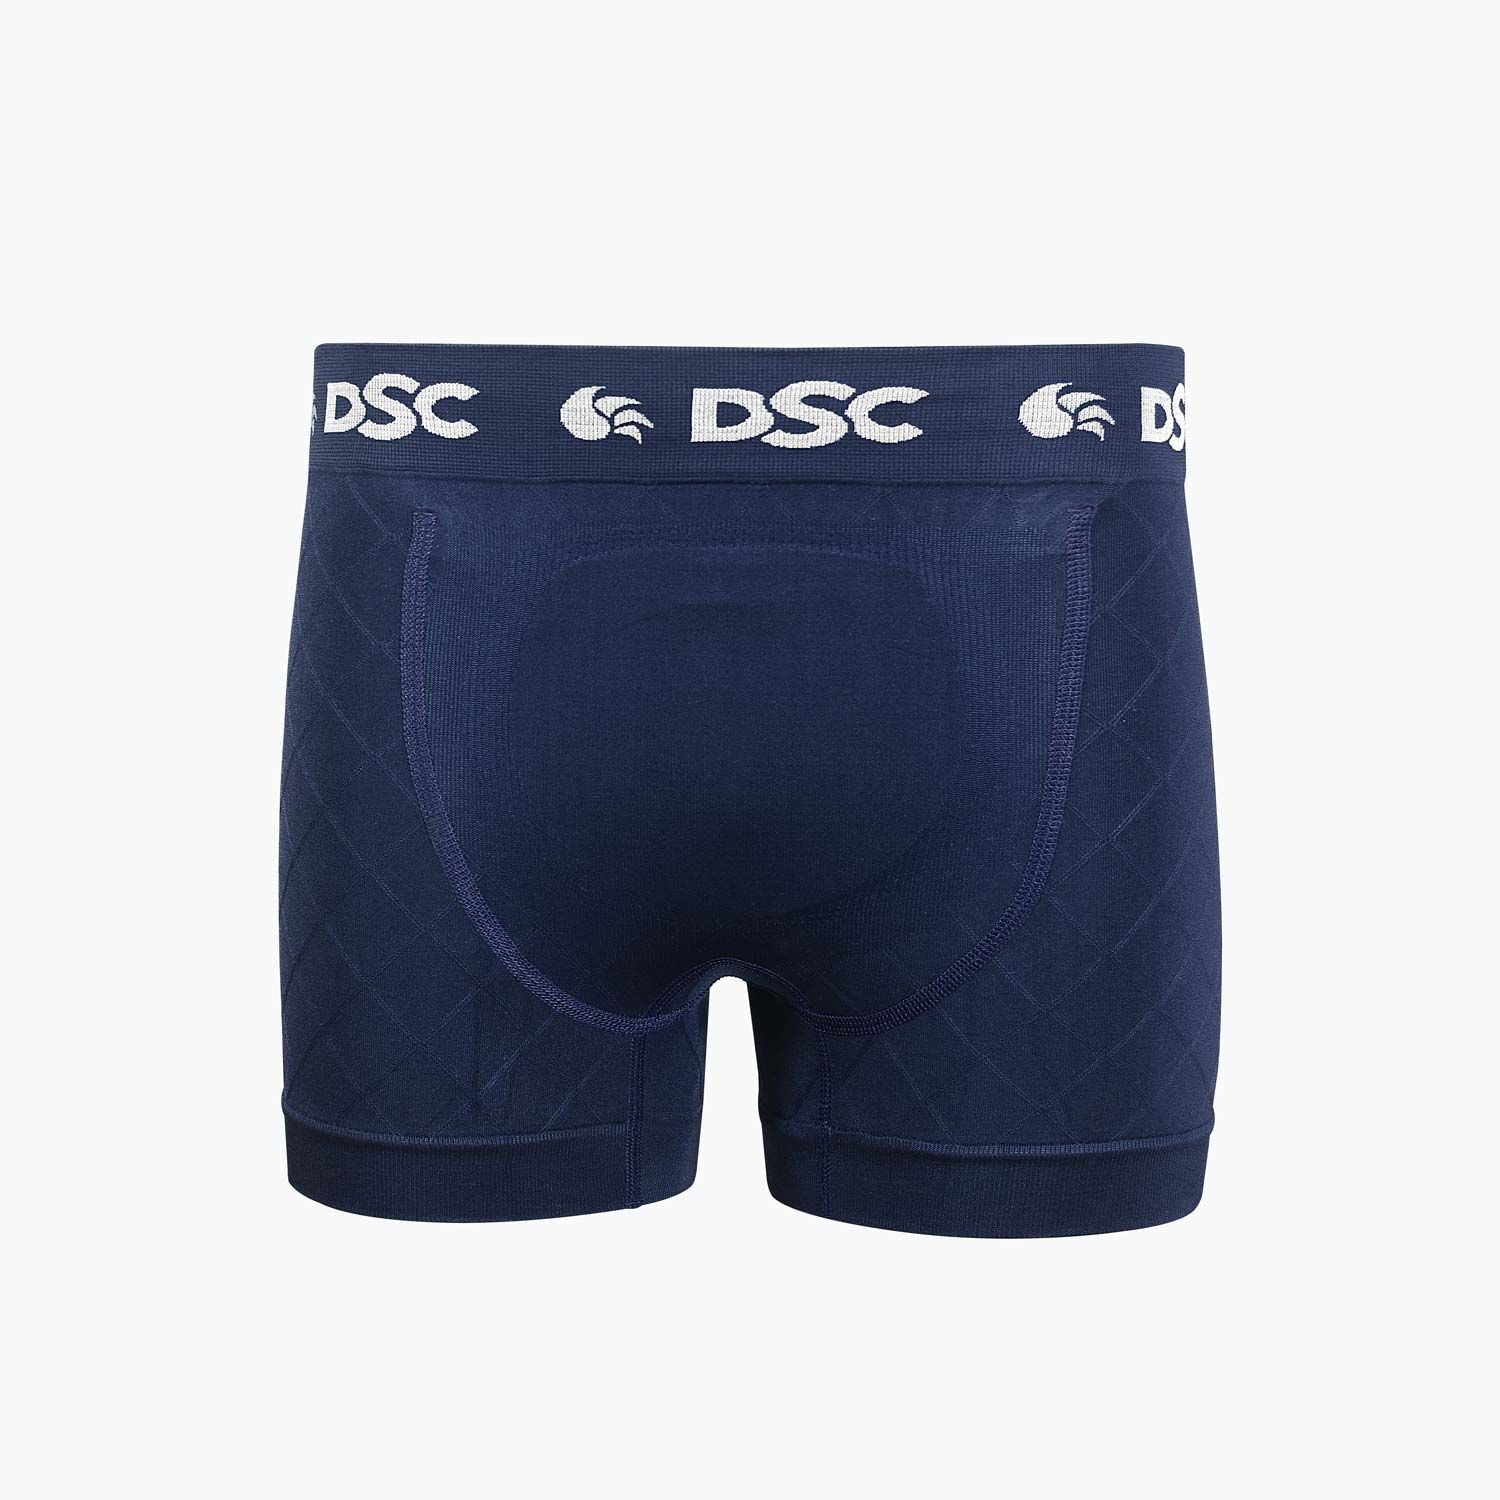 DSC Trunk Athletic Supporter